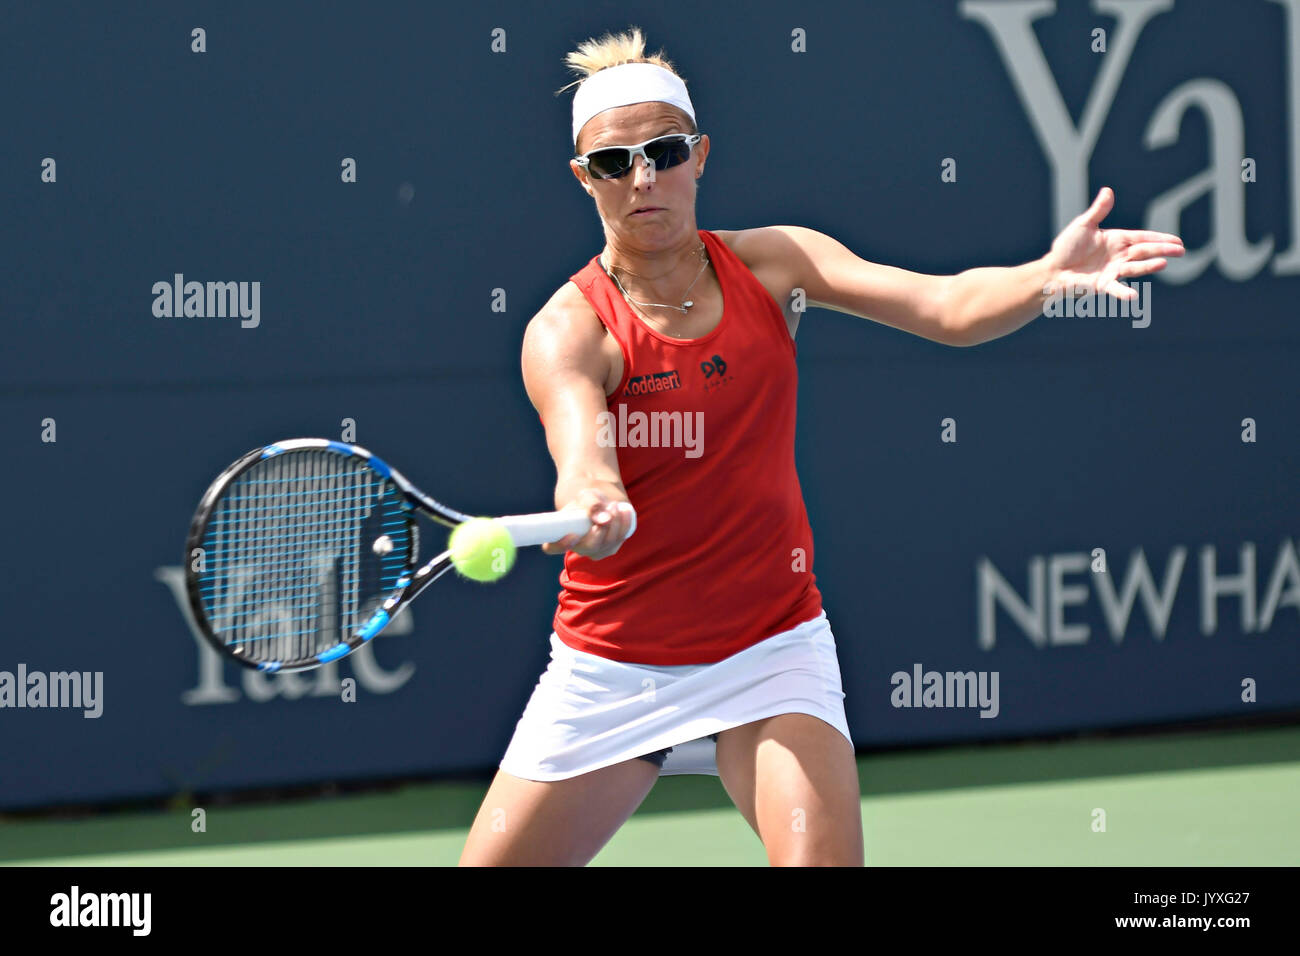 August 20, 2017: Kirsten Flipkens (BEL) hits a forehand vs. Magdalena Rybarikova (SVK) during their second round, qualifying match at the 2017 Connecticut Open. The match was won by Flipkins 6-3, 6-4. Ron Waite/CSM Stock Photo